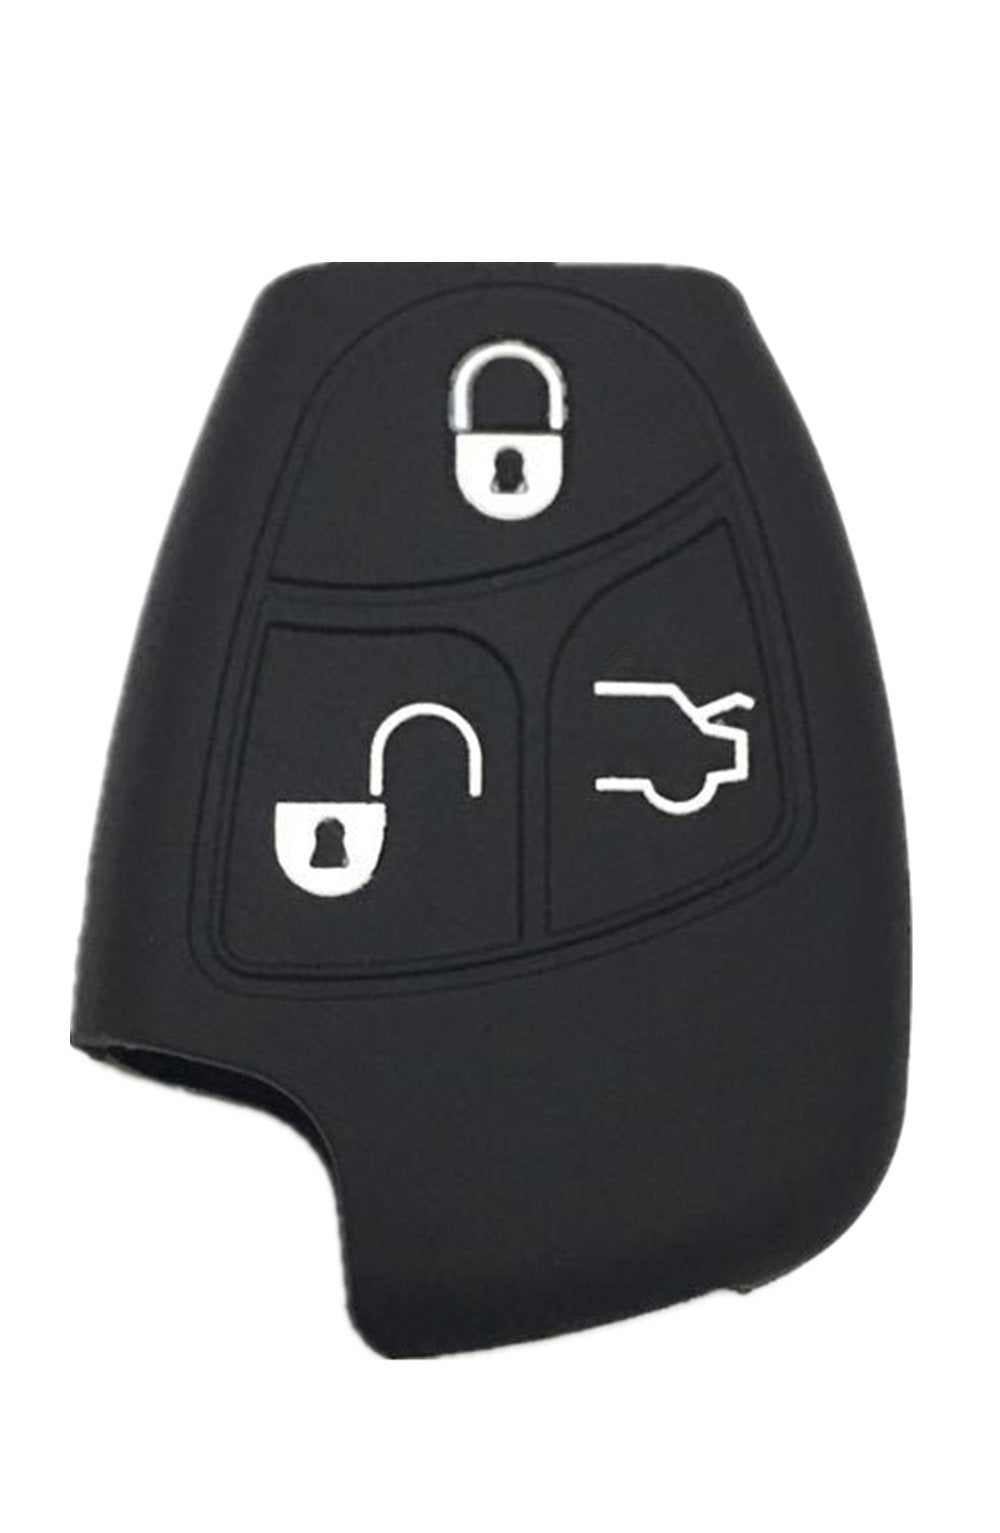 Rpkey Silicone Keyless Entry Remote Control Key Fob Cover Case protector Replacement Fit For Mercedes-Benz Class A C E S ML CLK SLK C200 E320 350 CLS IYZ3312 - LeoForward Australia